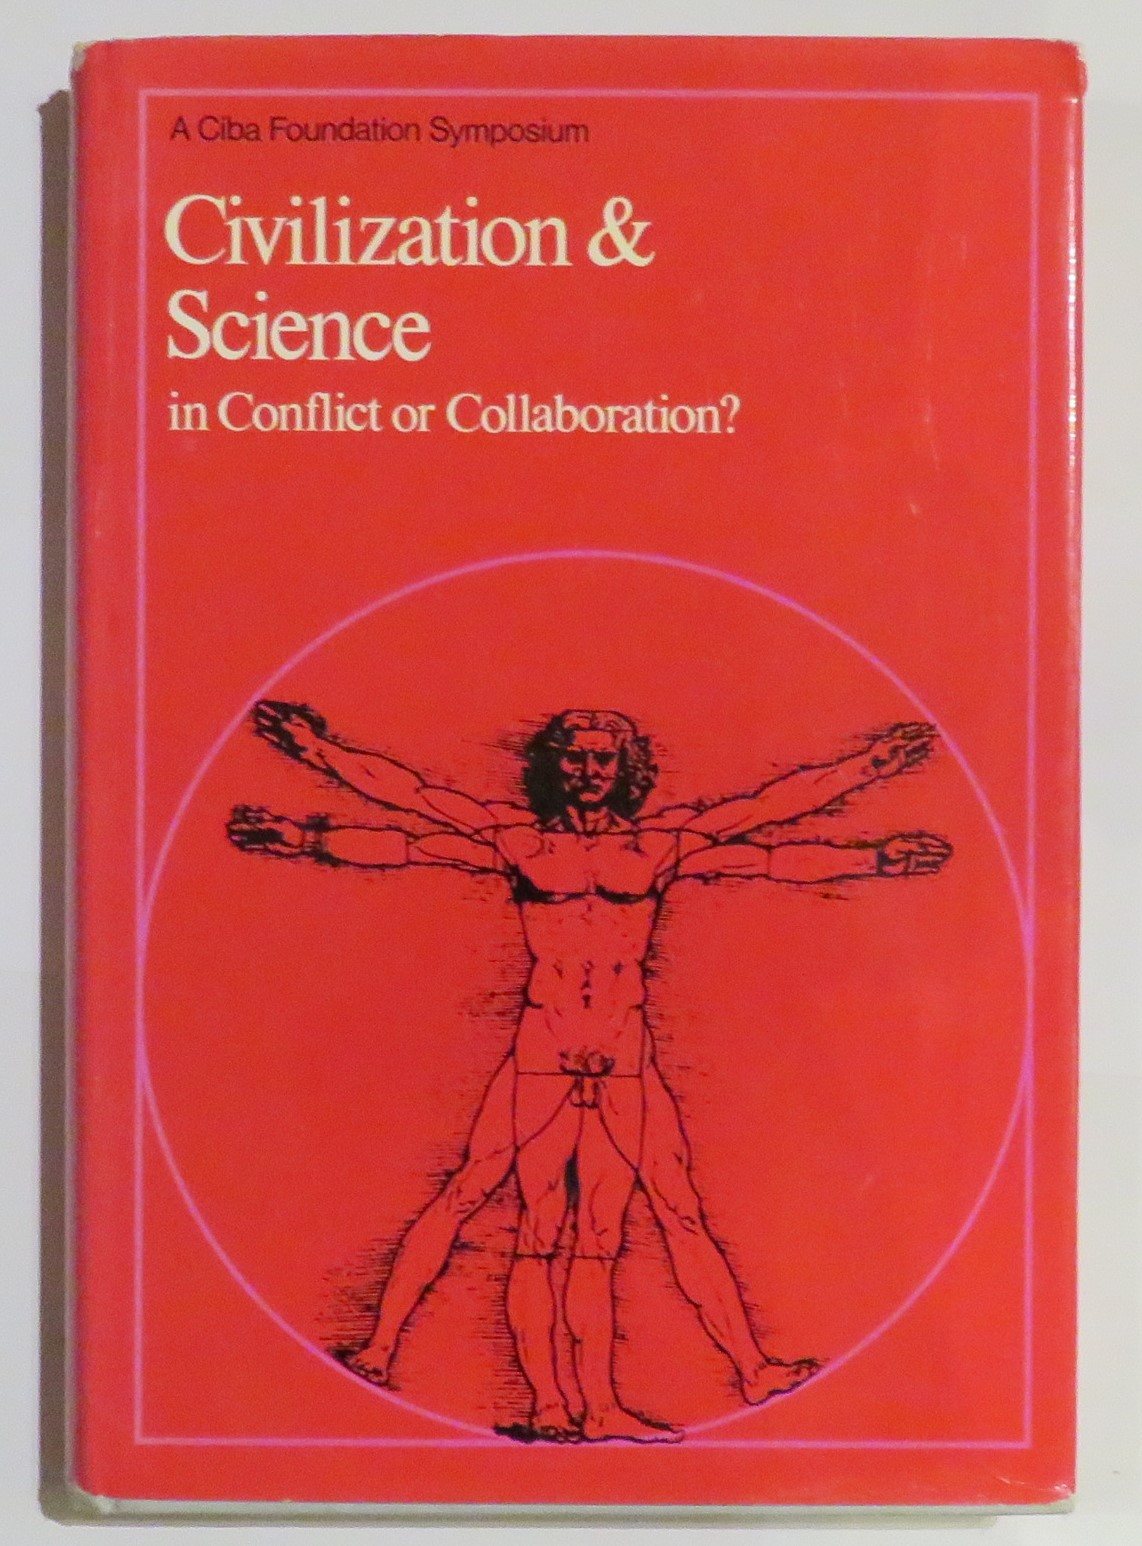 Civilisation & Science in Conflict or Collaboration?